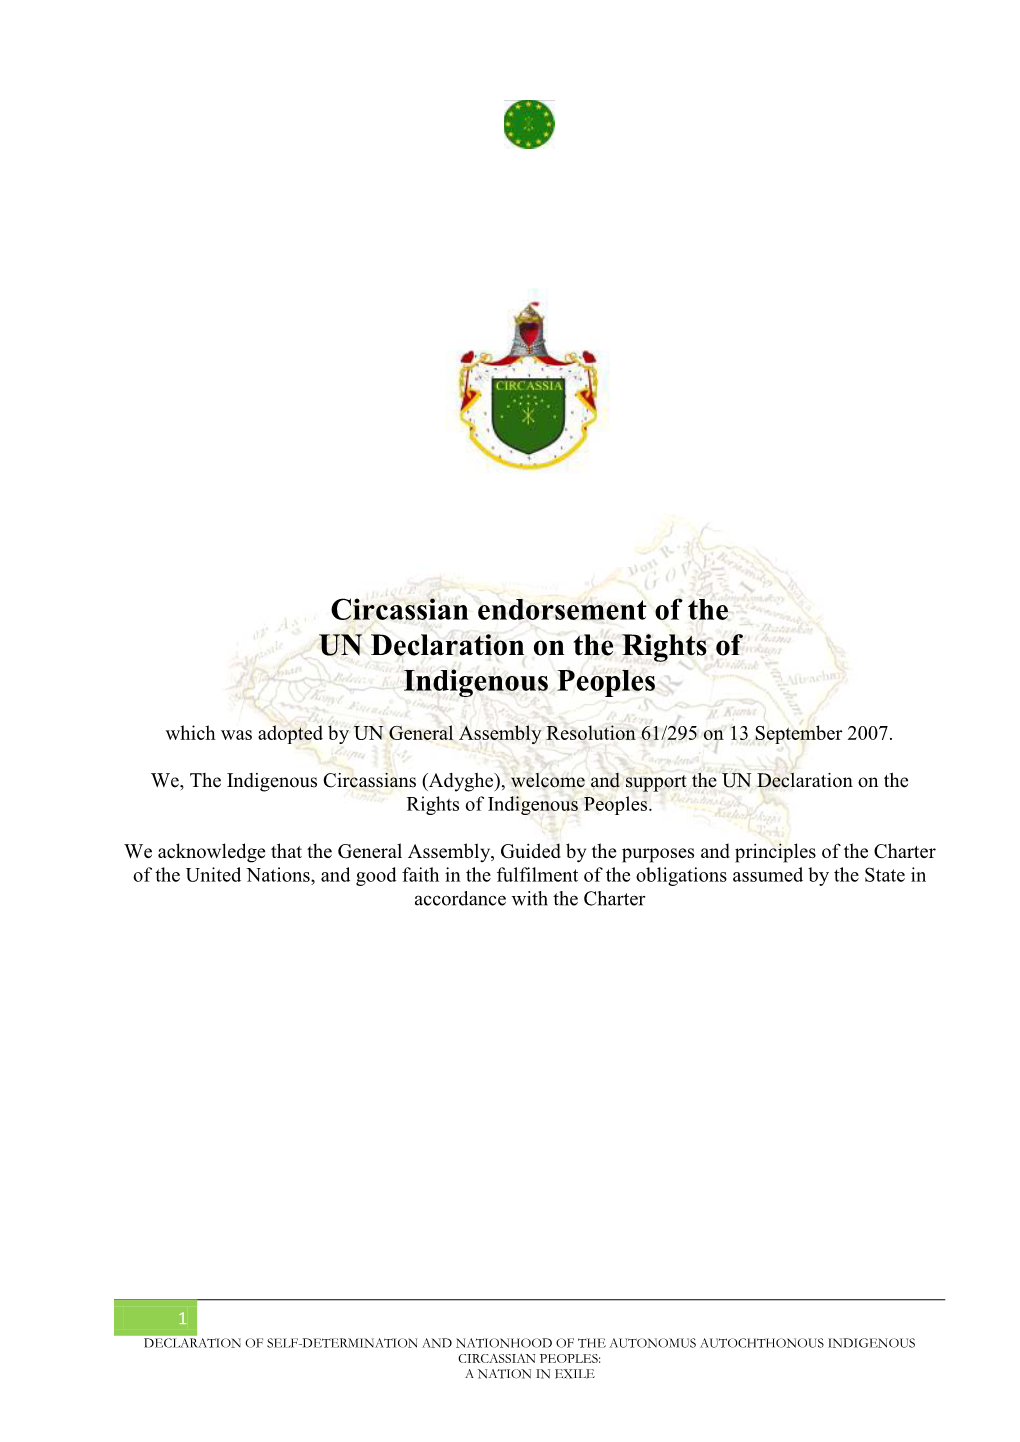 Circassian Endorsement of the UN Declaration on the Rights of Indigenous Peoples